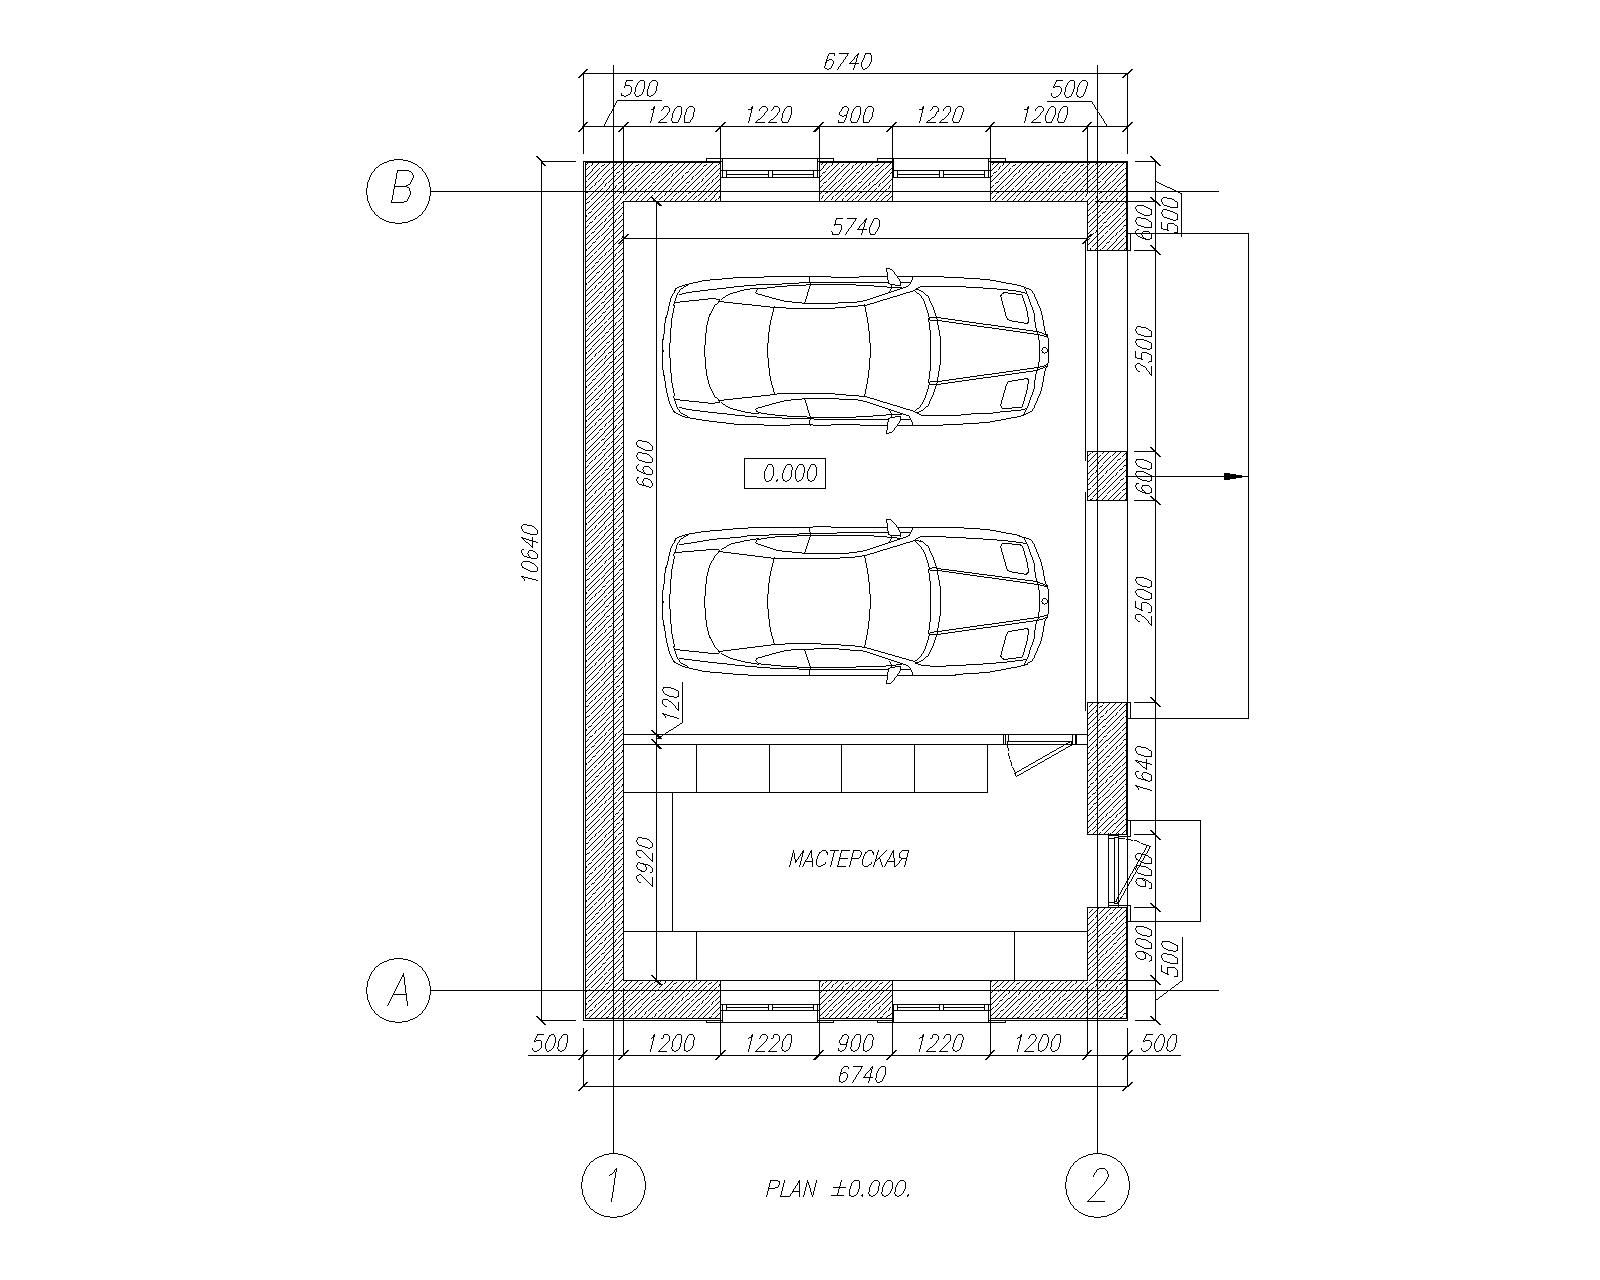 Garage Plan for 2 Cars .dwg | Thousands of free AutoCAD drawings